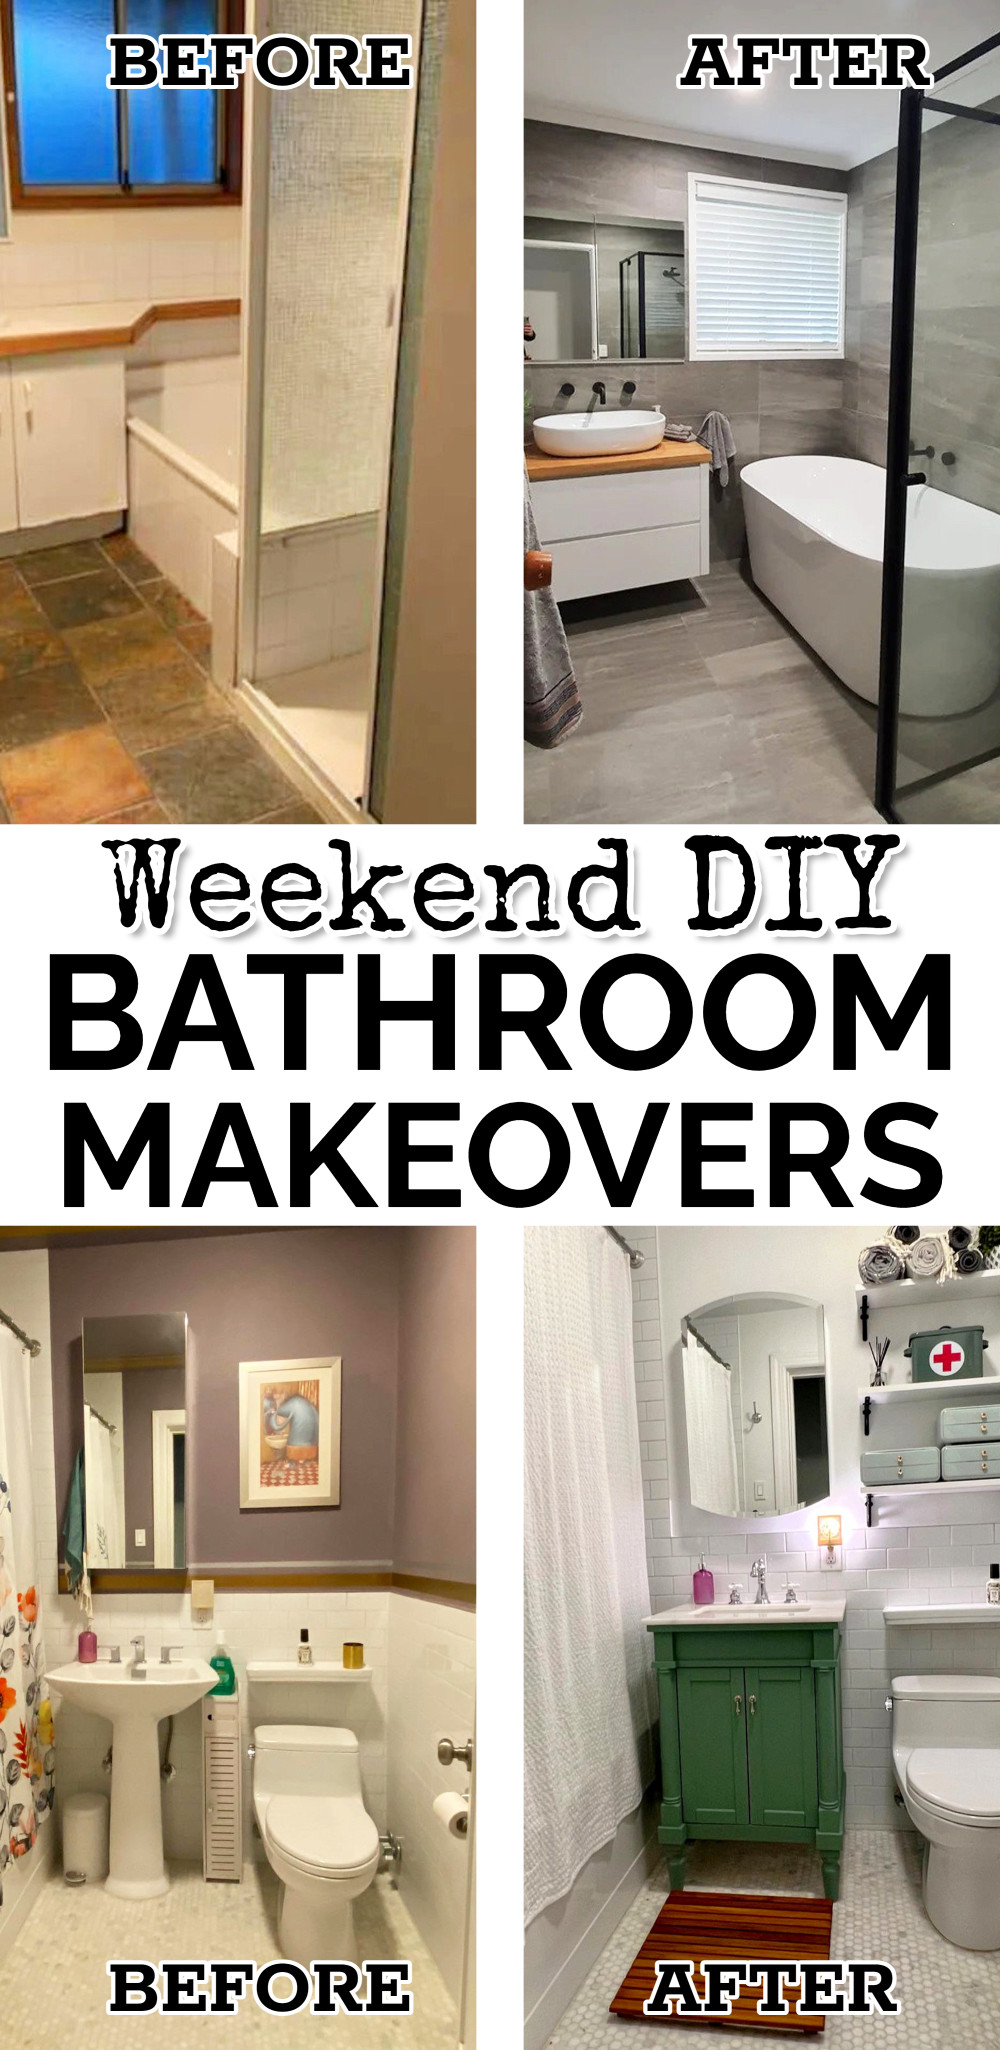 Weekend DIY Bathroom Makeovers Before and After Budget-Friendly Upgrades